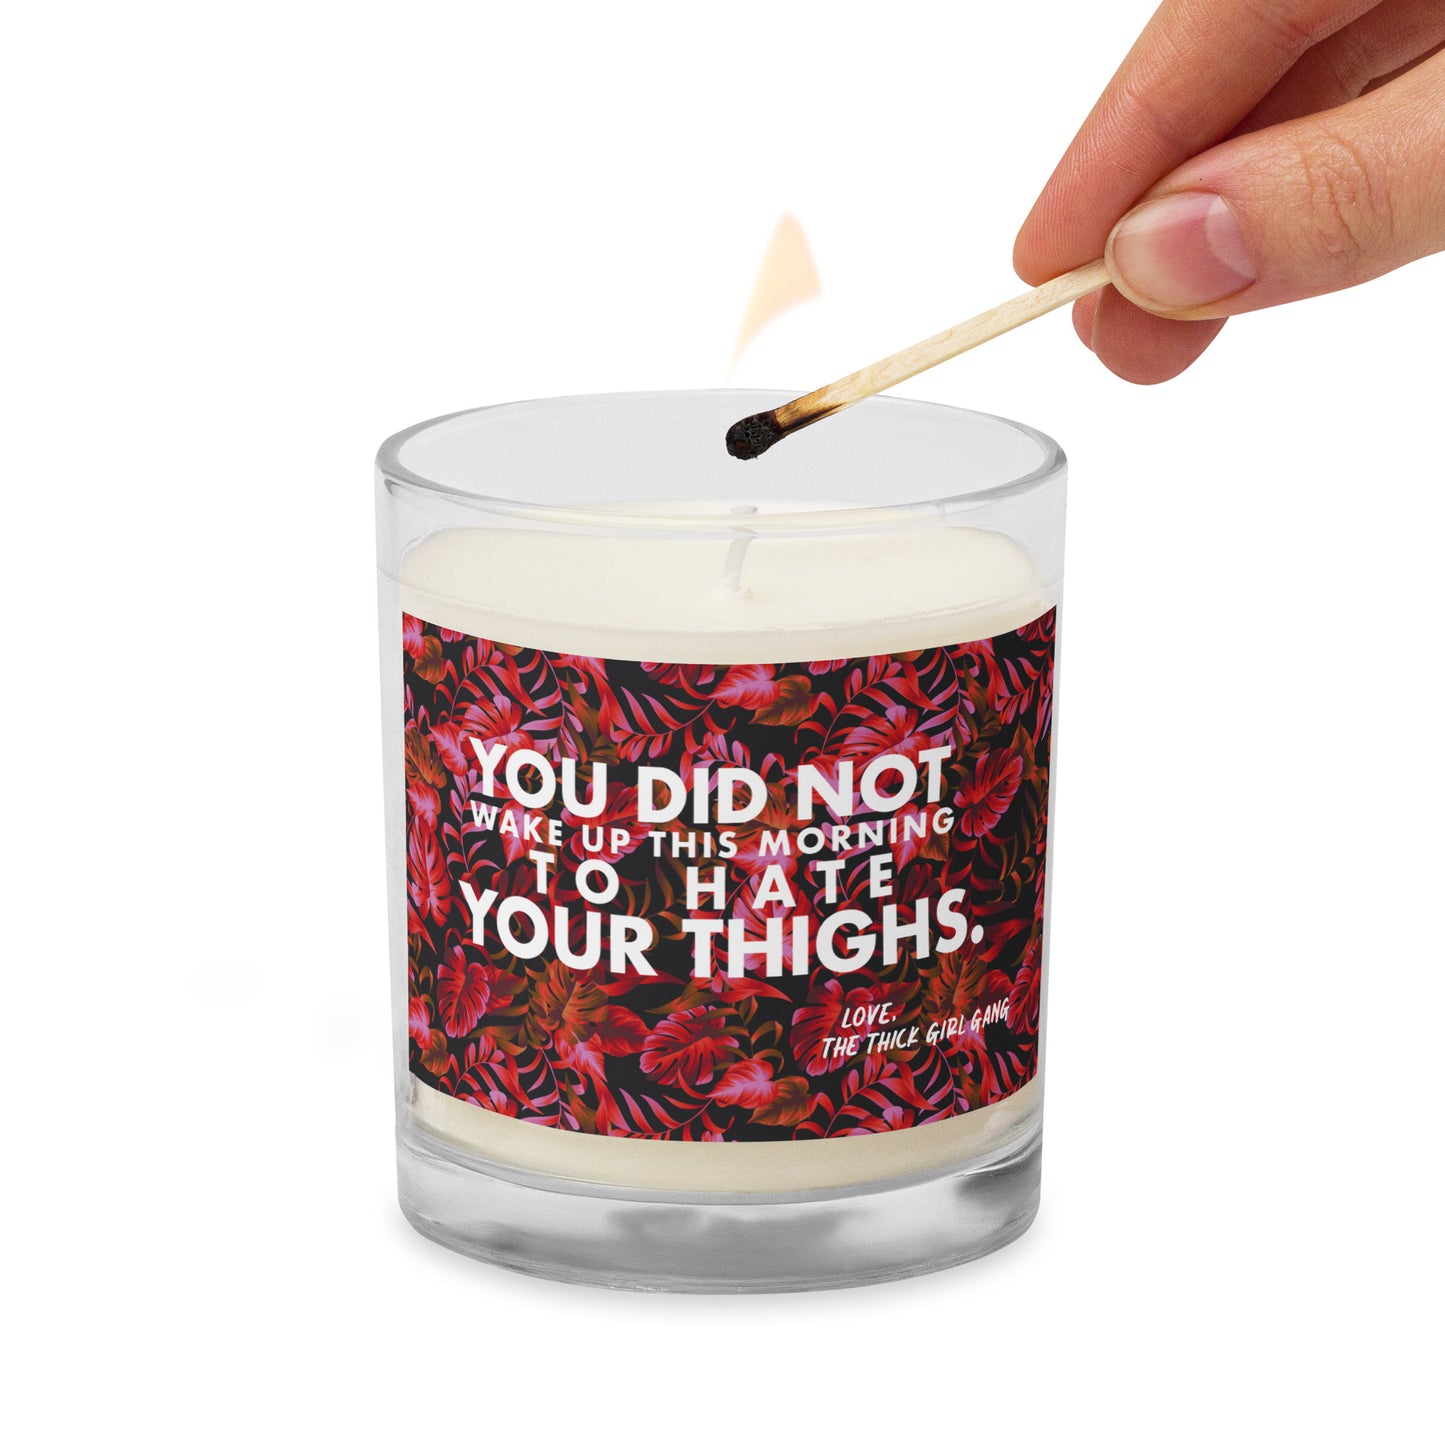 The You Did Not Wake Up This Morning To Hate Your Thighs Candle